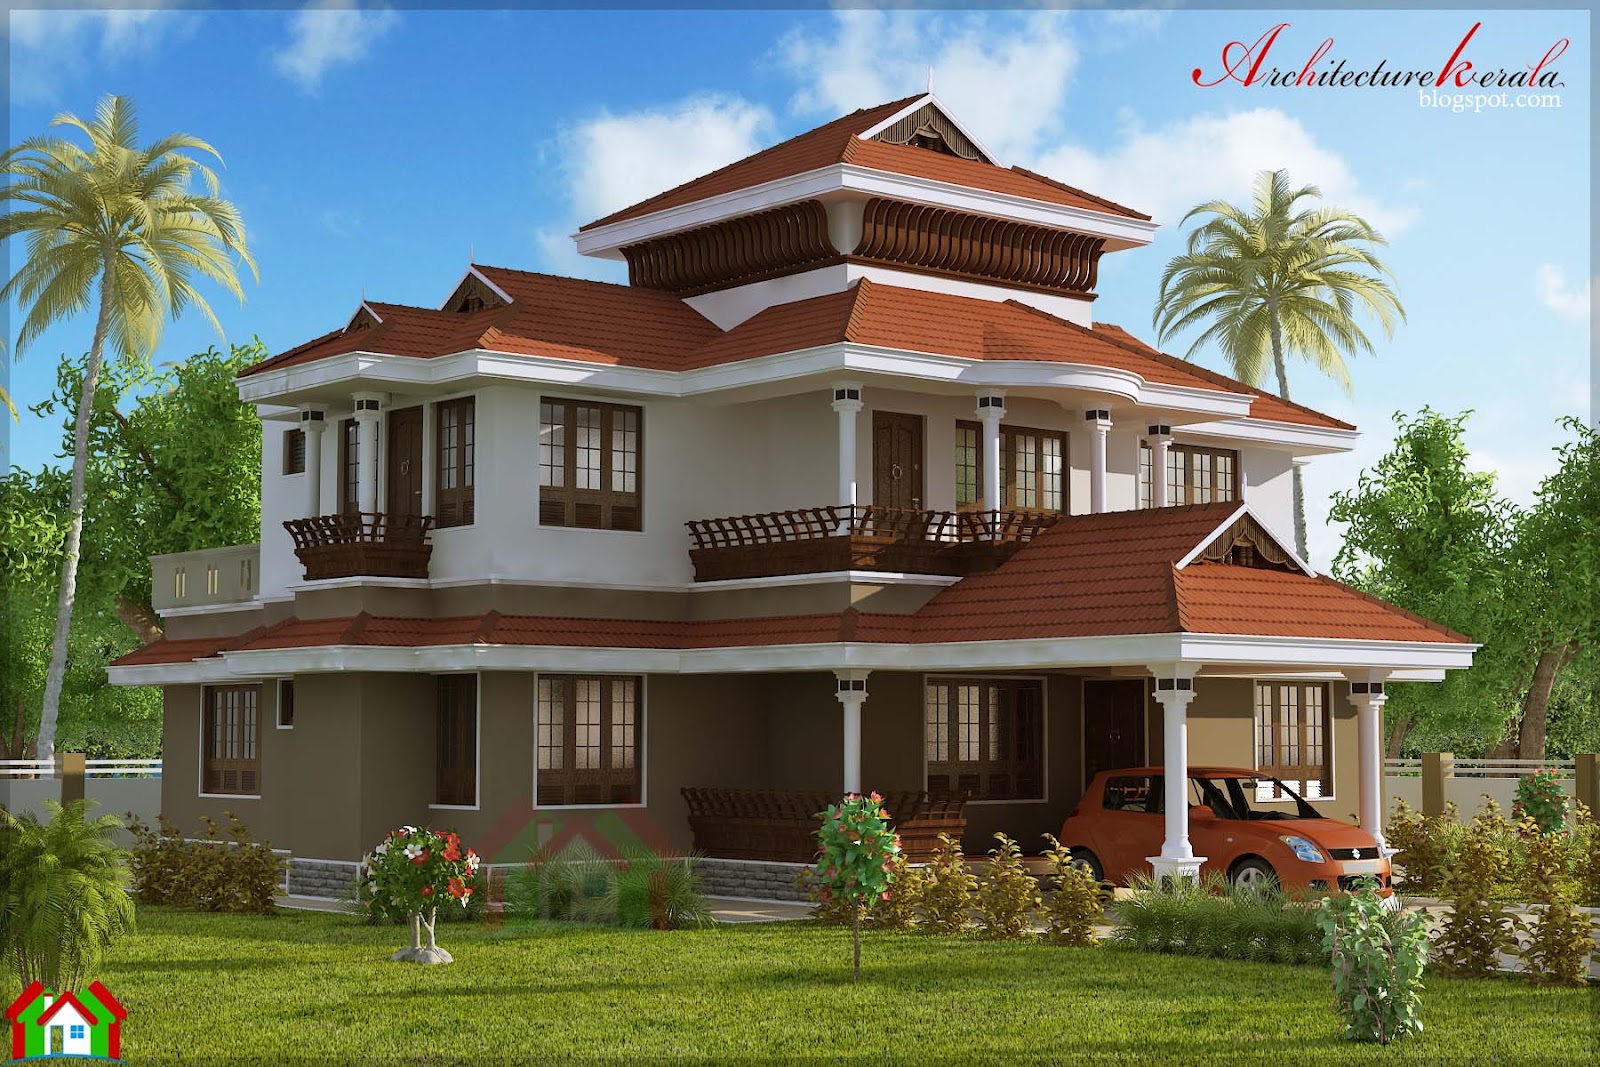 Architecture Kerala 4 BED ROOM TRADITIONAL STYLE HOUSE